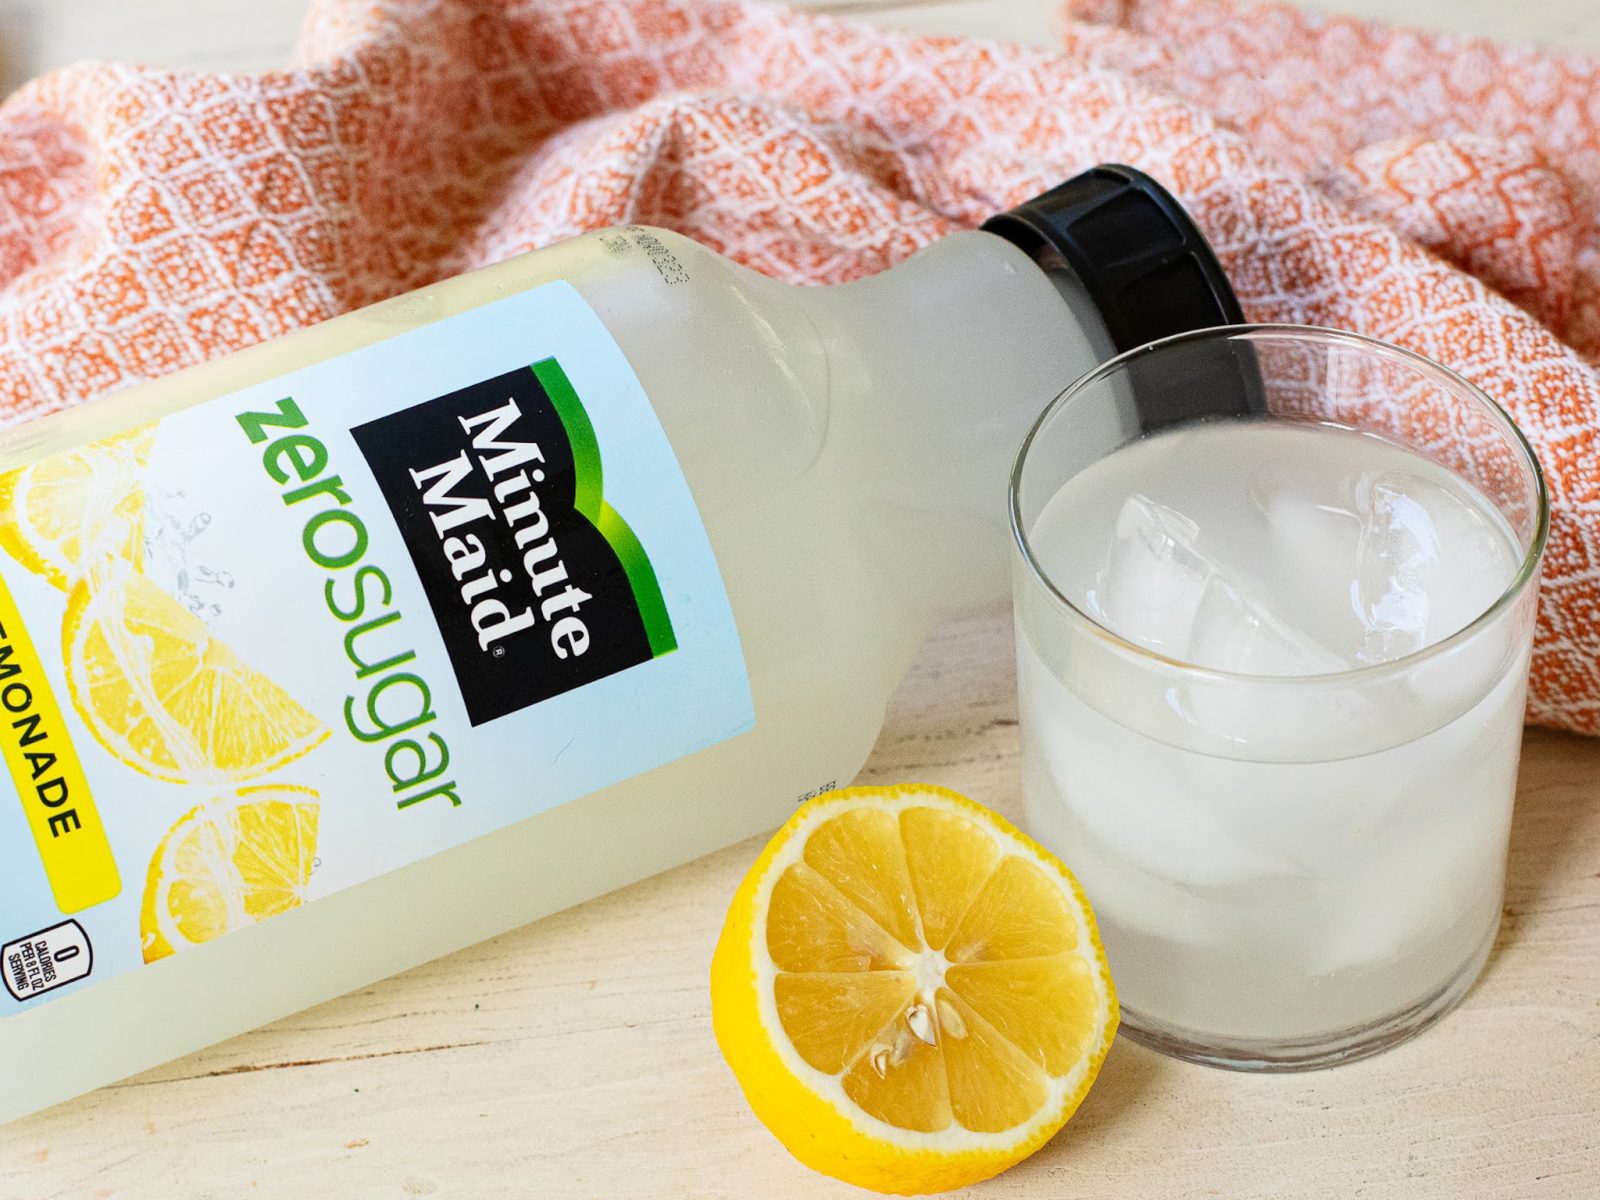 Minute Maid Zero Sugar As Low As $1.75 Per Bottle At Kroger